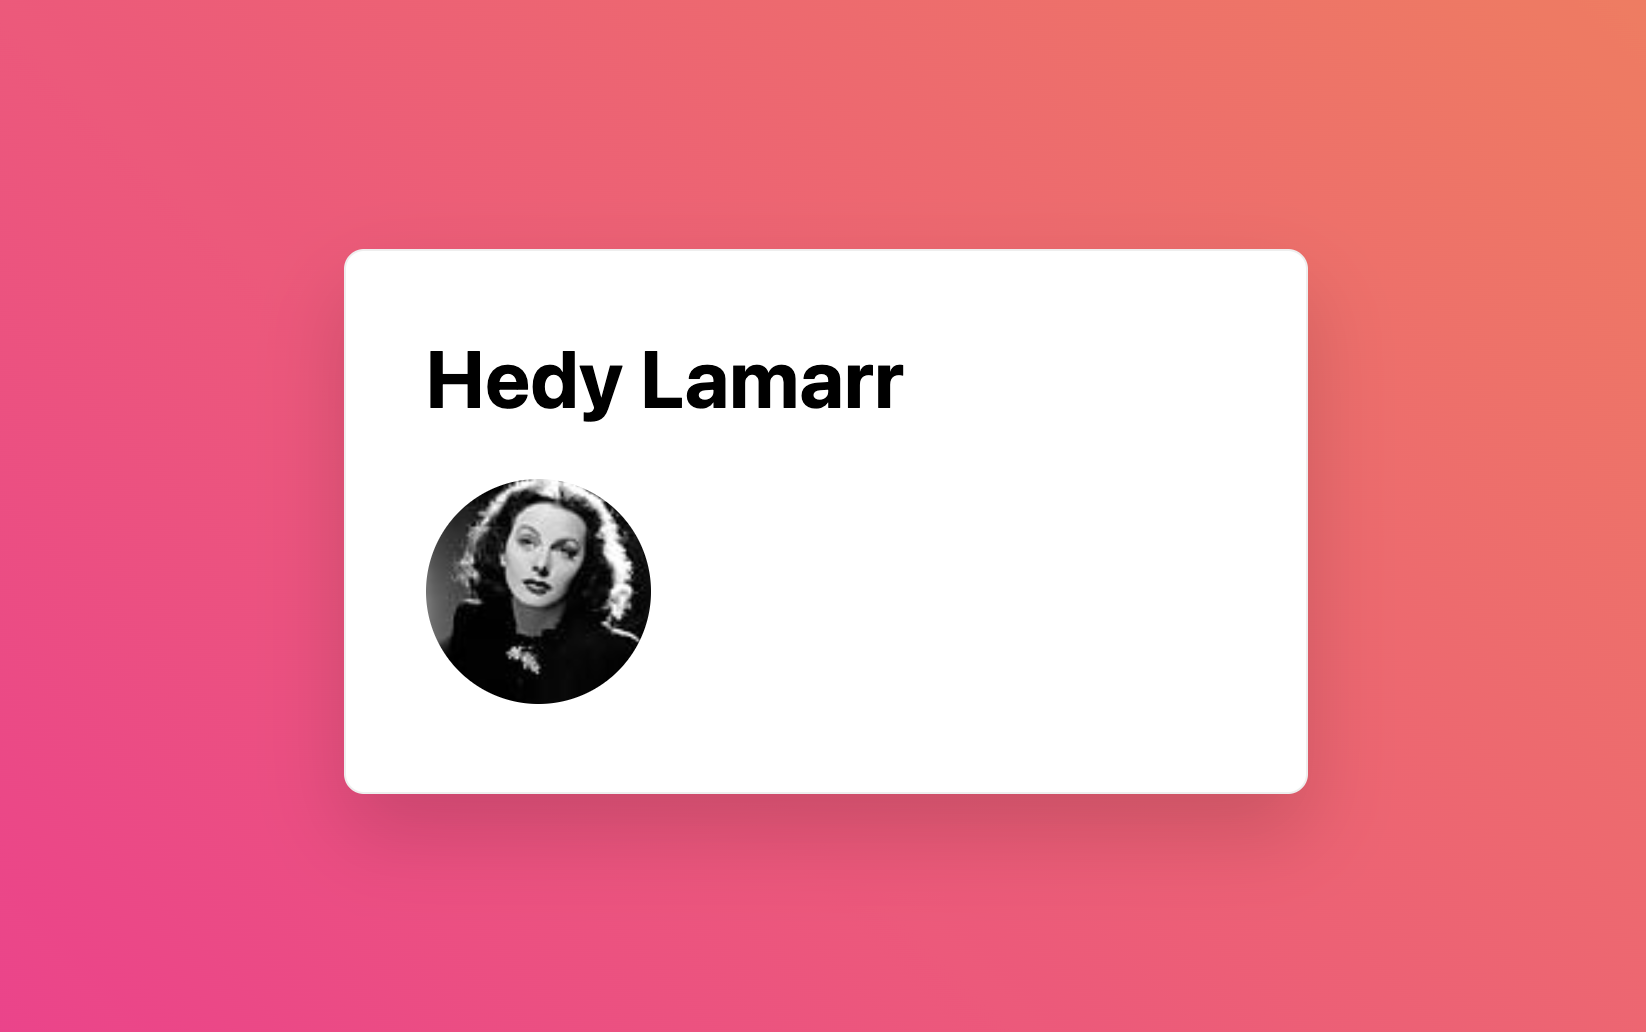 Demo of the Hedy Lamarr app